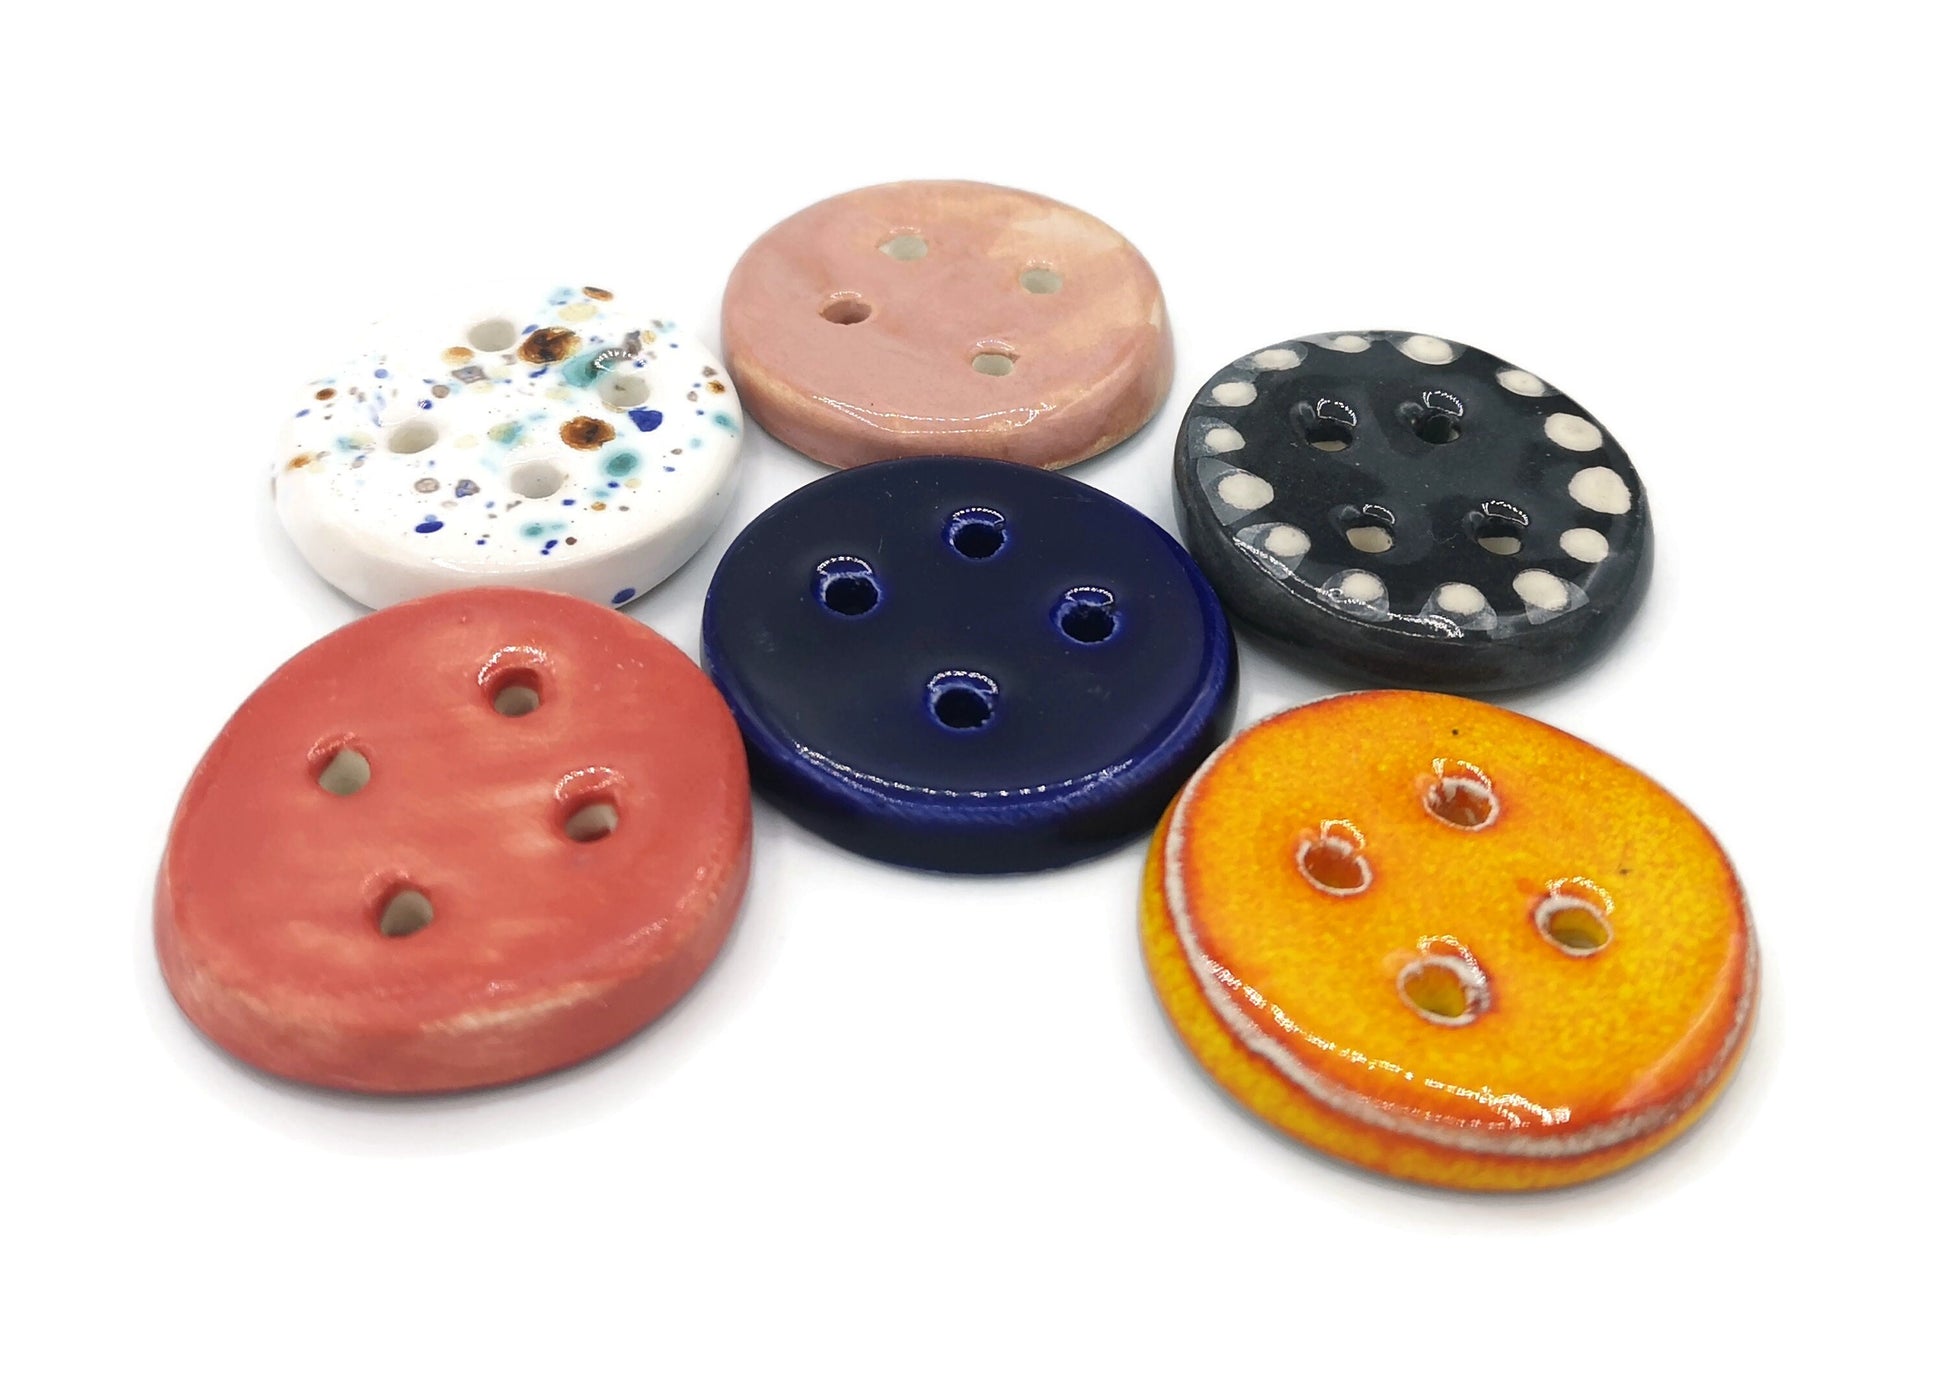 6Pc 40mm Glazed Extra Large Clay Sewing Buttons, Assorted Handmade Ceramic Buttons, Unique Strange And Unusual 4-hole Flat Back Buttons - Ceramica Ana Rafael